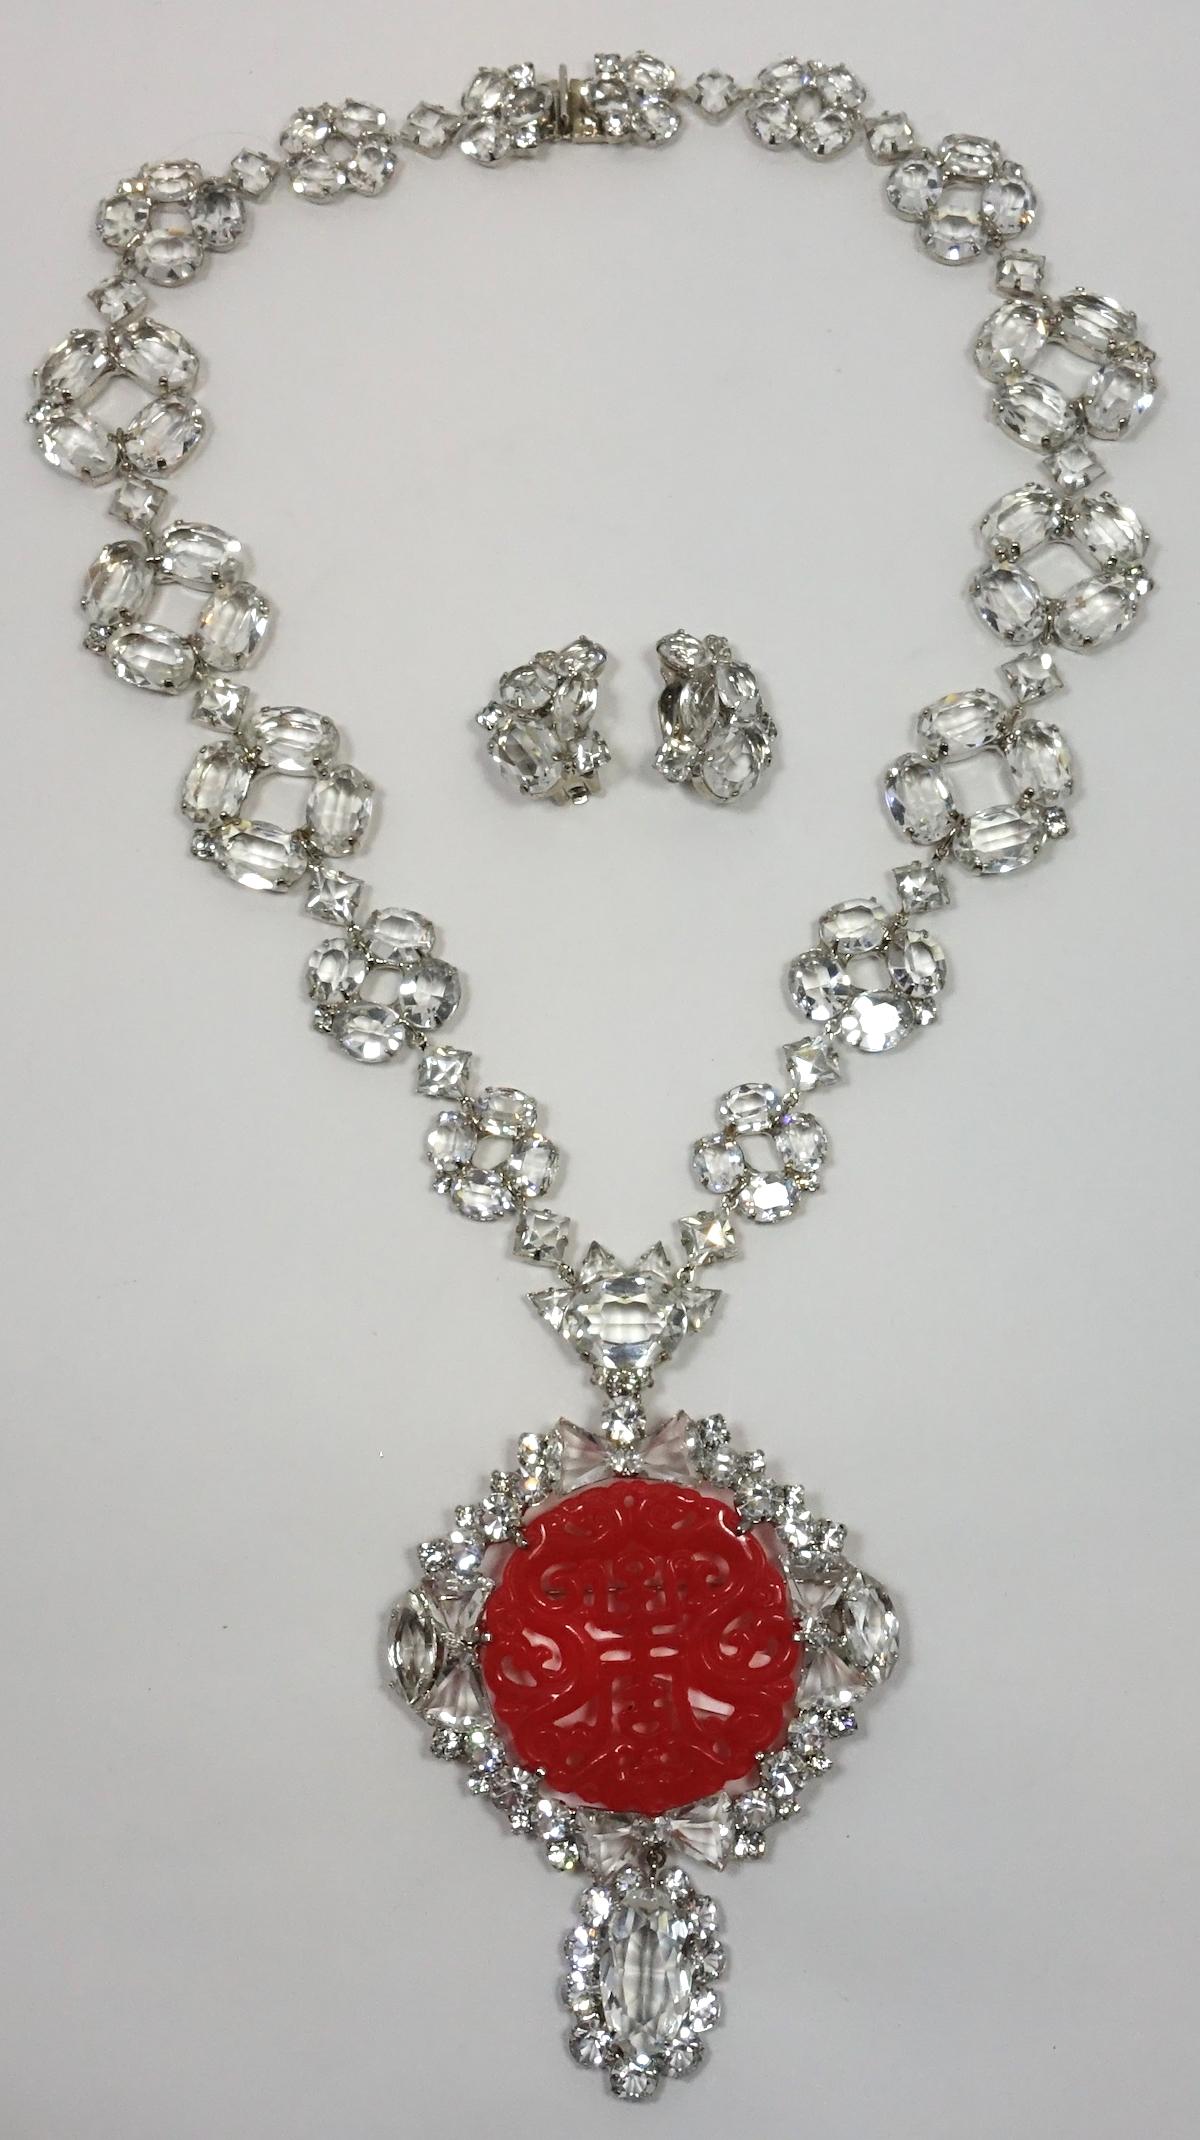 One-of-a-Kind Signed Robert Sorrell Brooch-Pendant Necklace & Earrings In Good Condition For Sale In New York, NY